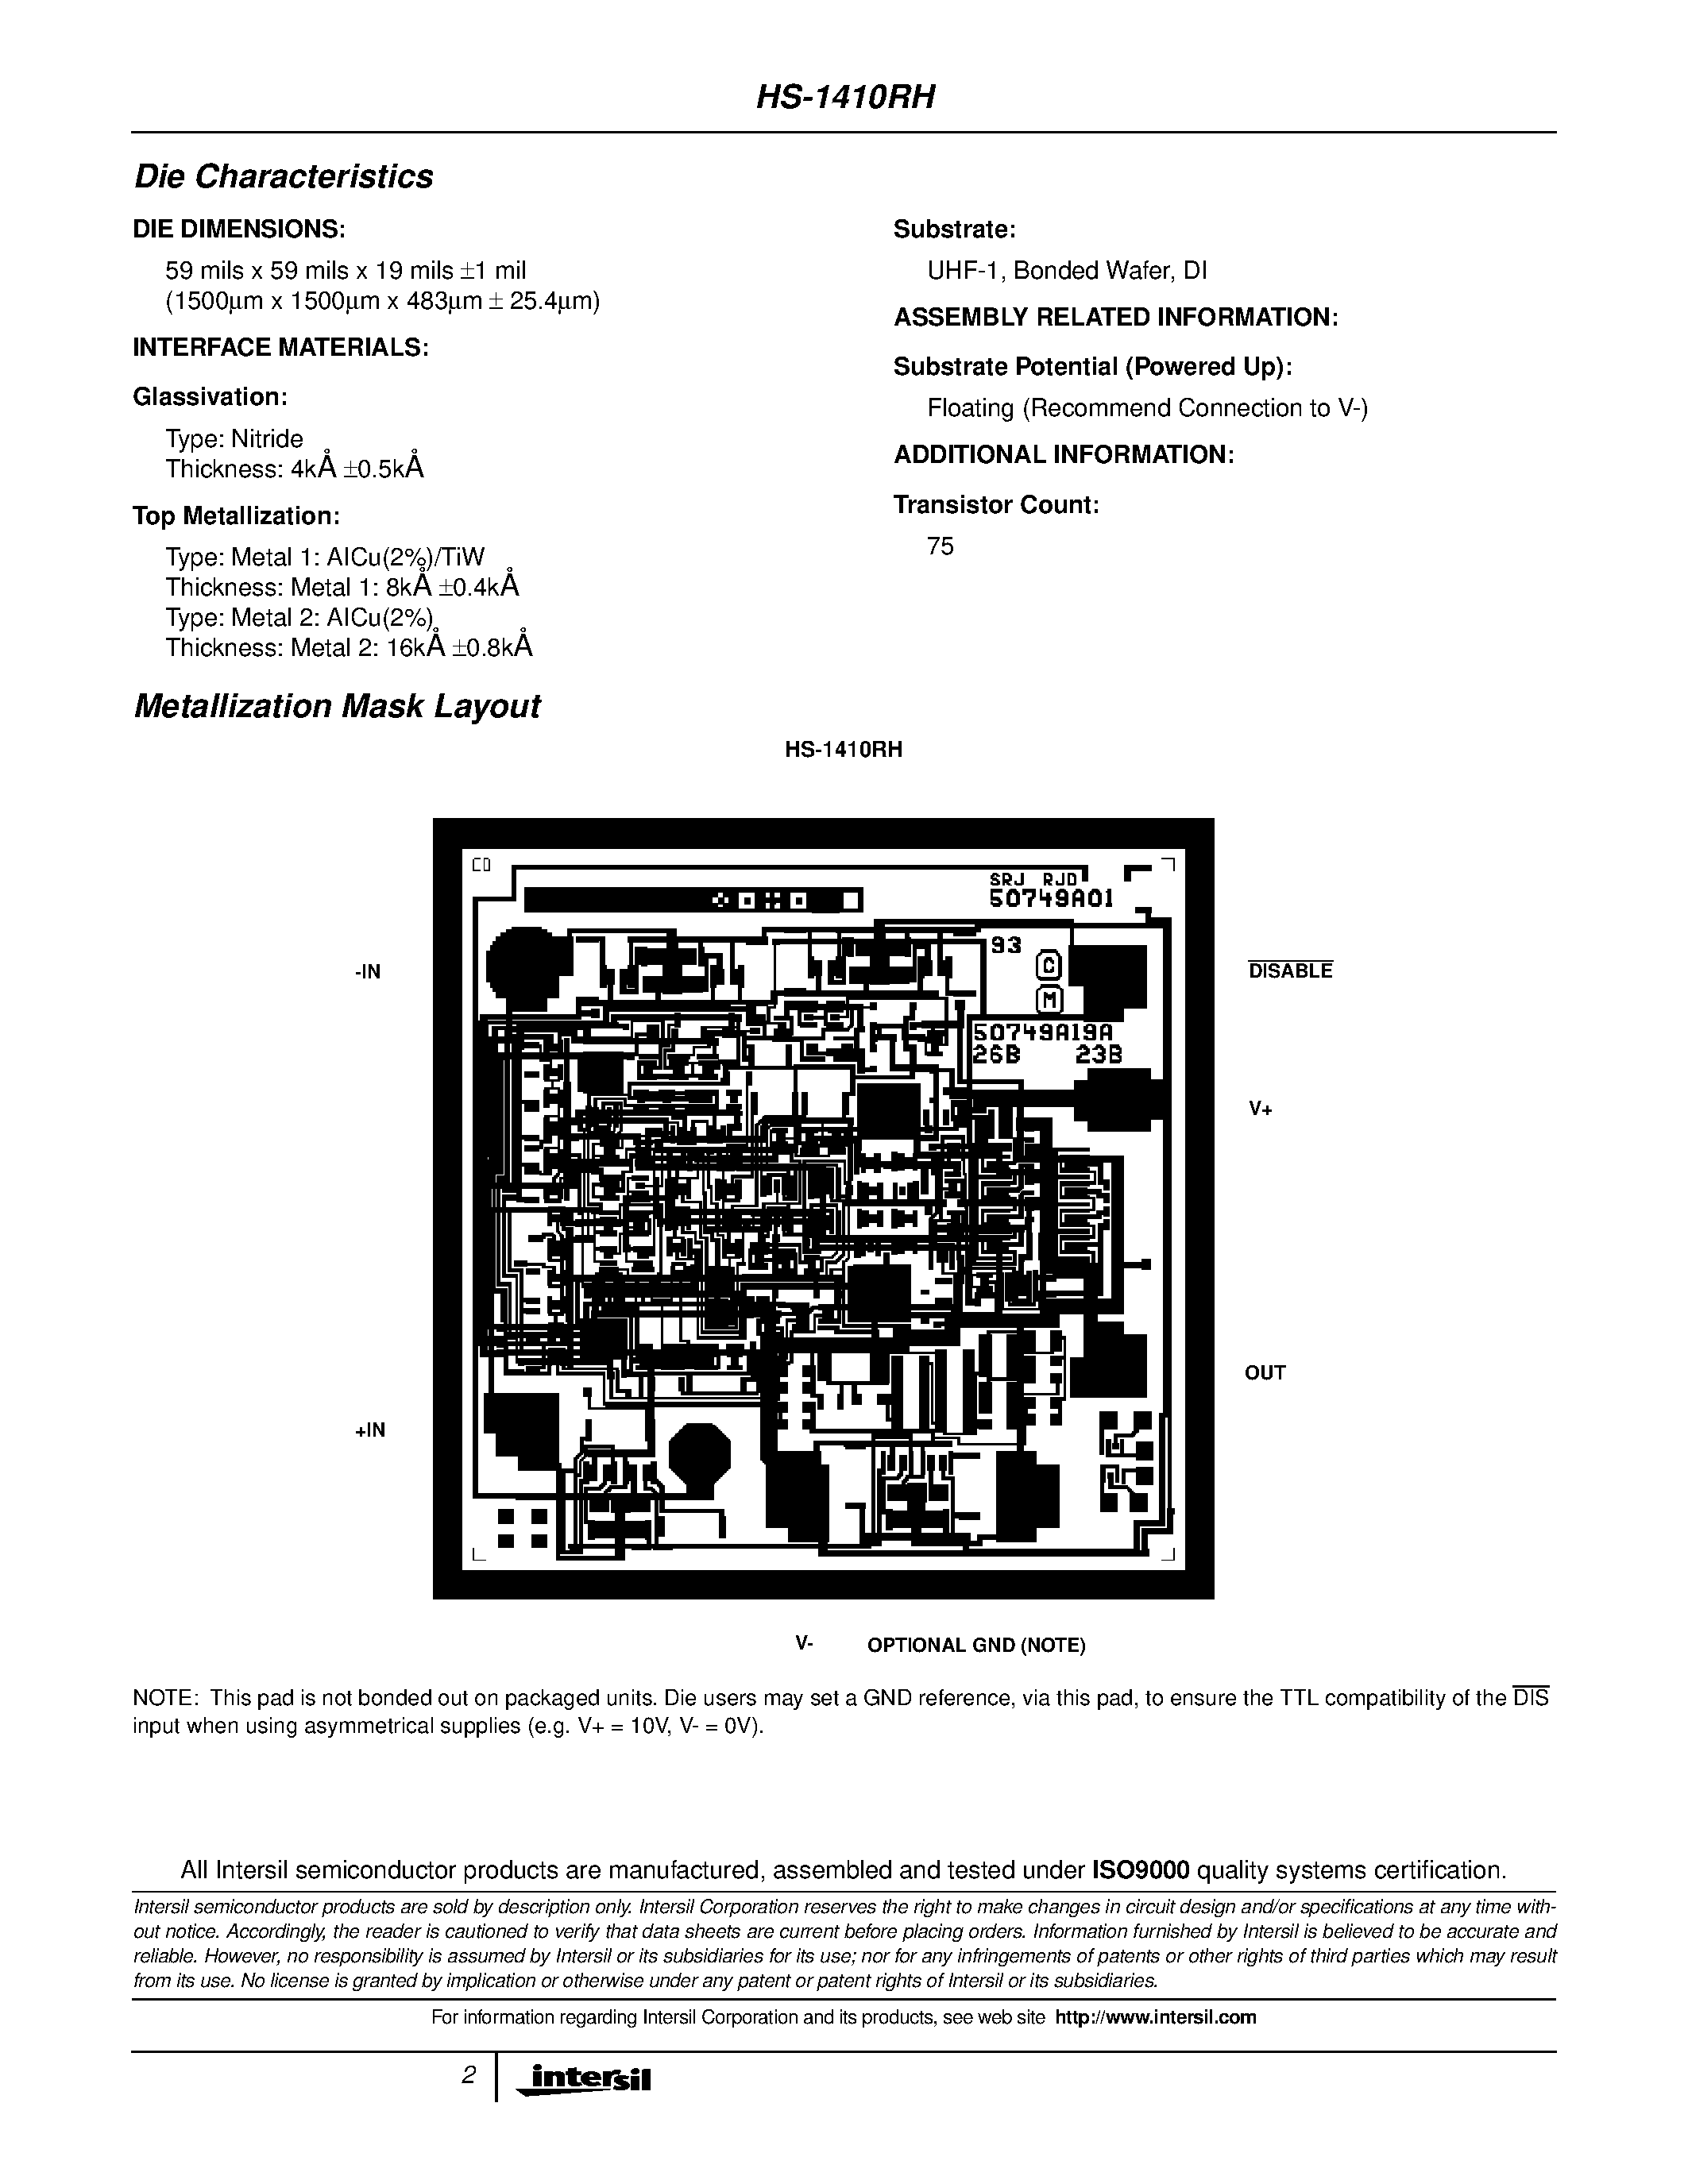 Datasheet HS9-1410RH-Q - Radiation Hardened/ High Speed/ Low Power/ Current Feedback Op Amp with Output Disable page 2